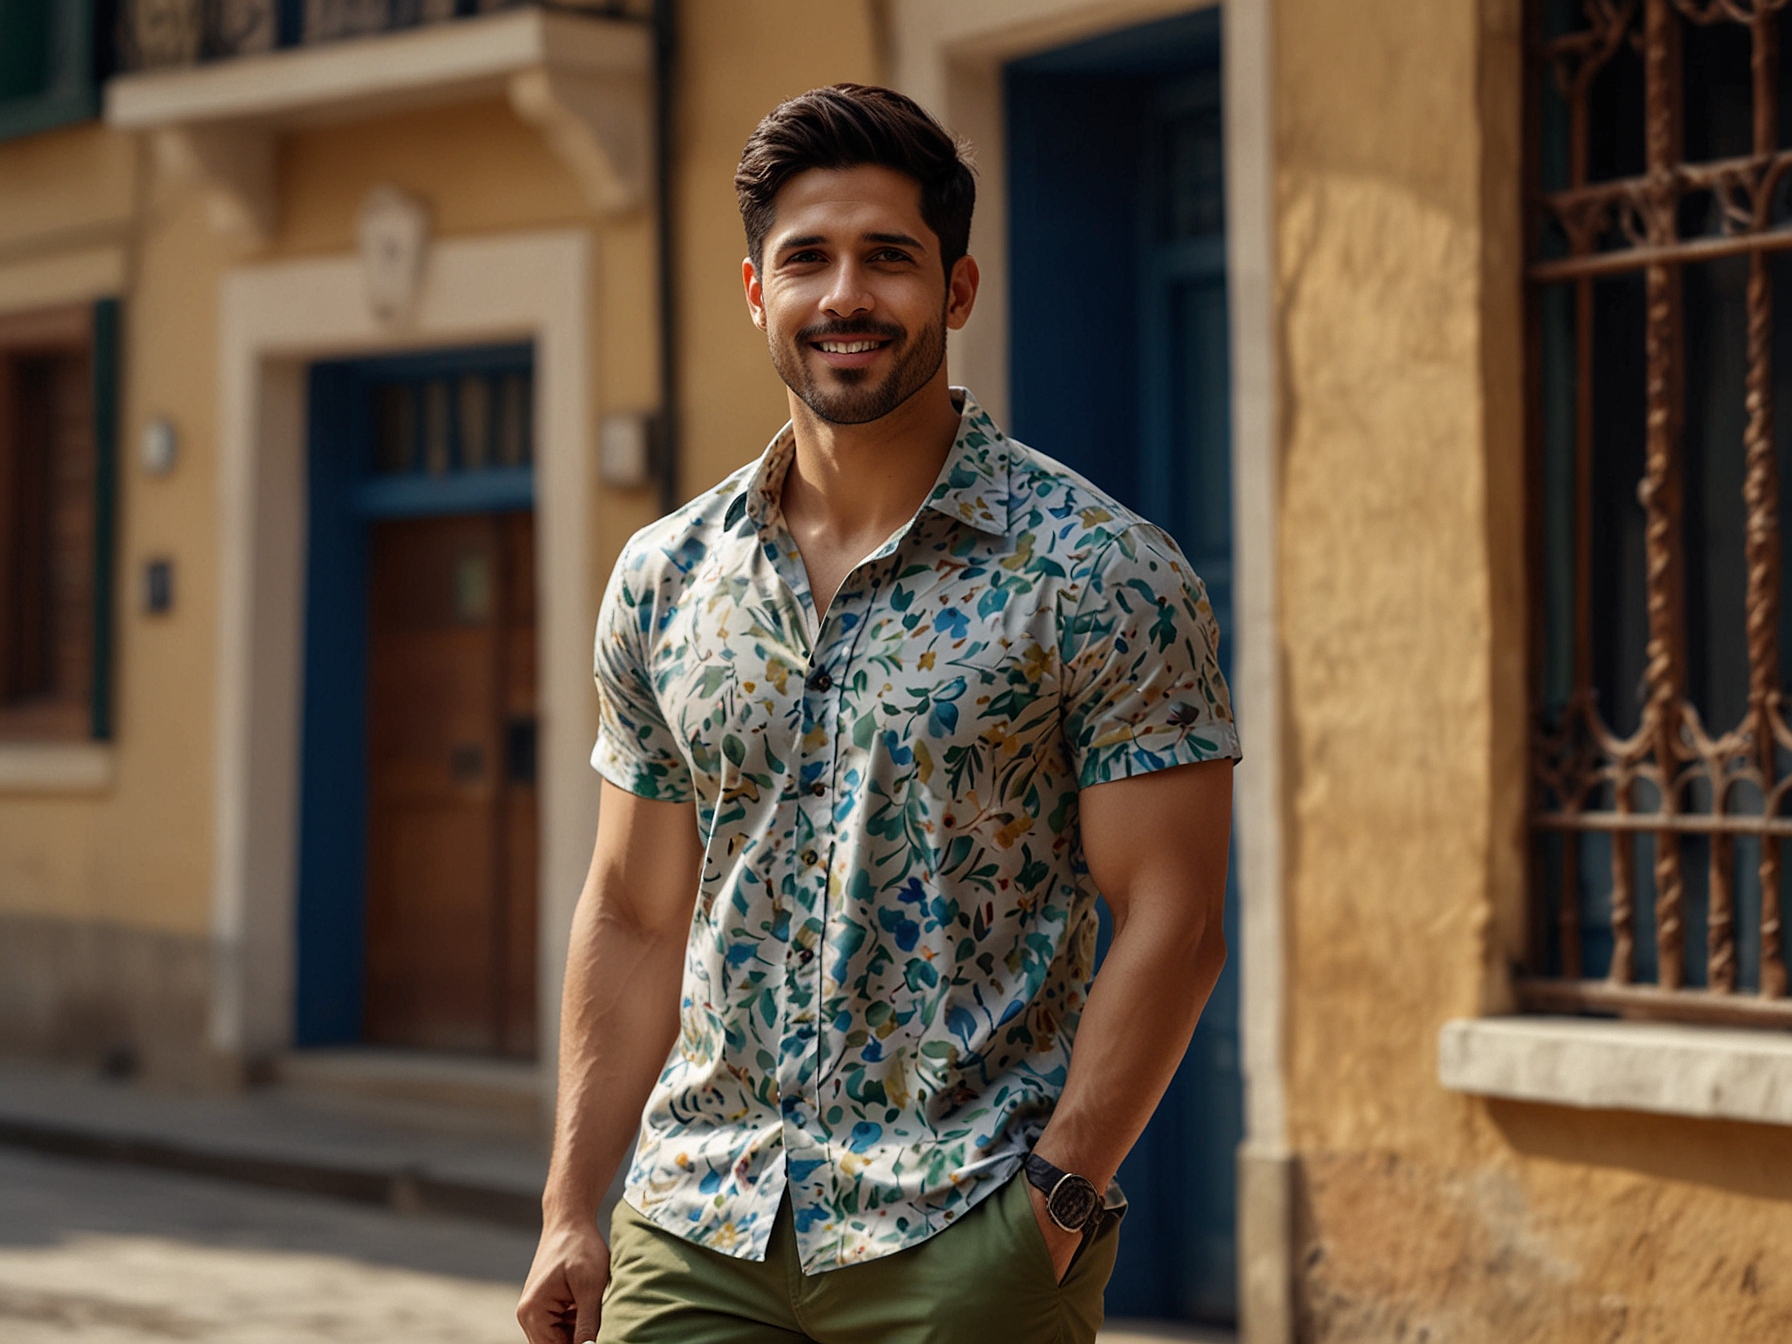 Sidharth Malhotra embraces the vibrant spirit of summer in a colorful floral shirt and khaki shorts, paired with white sneakers. The picturesque European streets make for a perfect day out look.